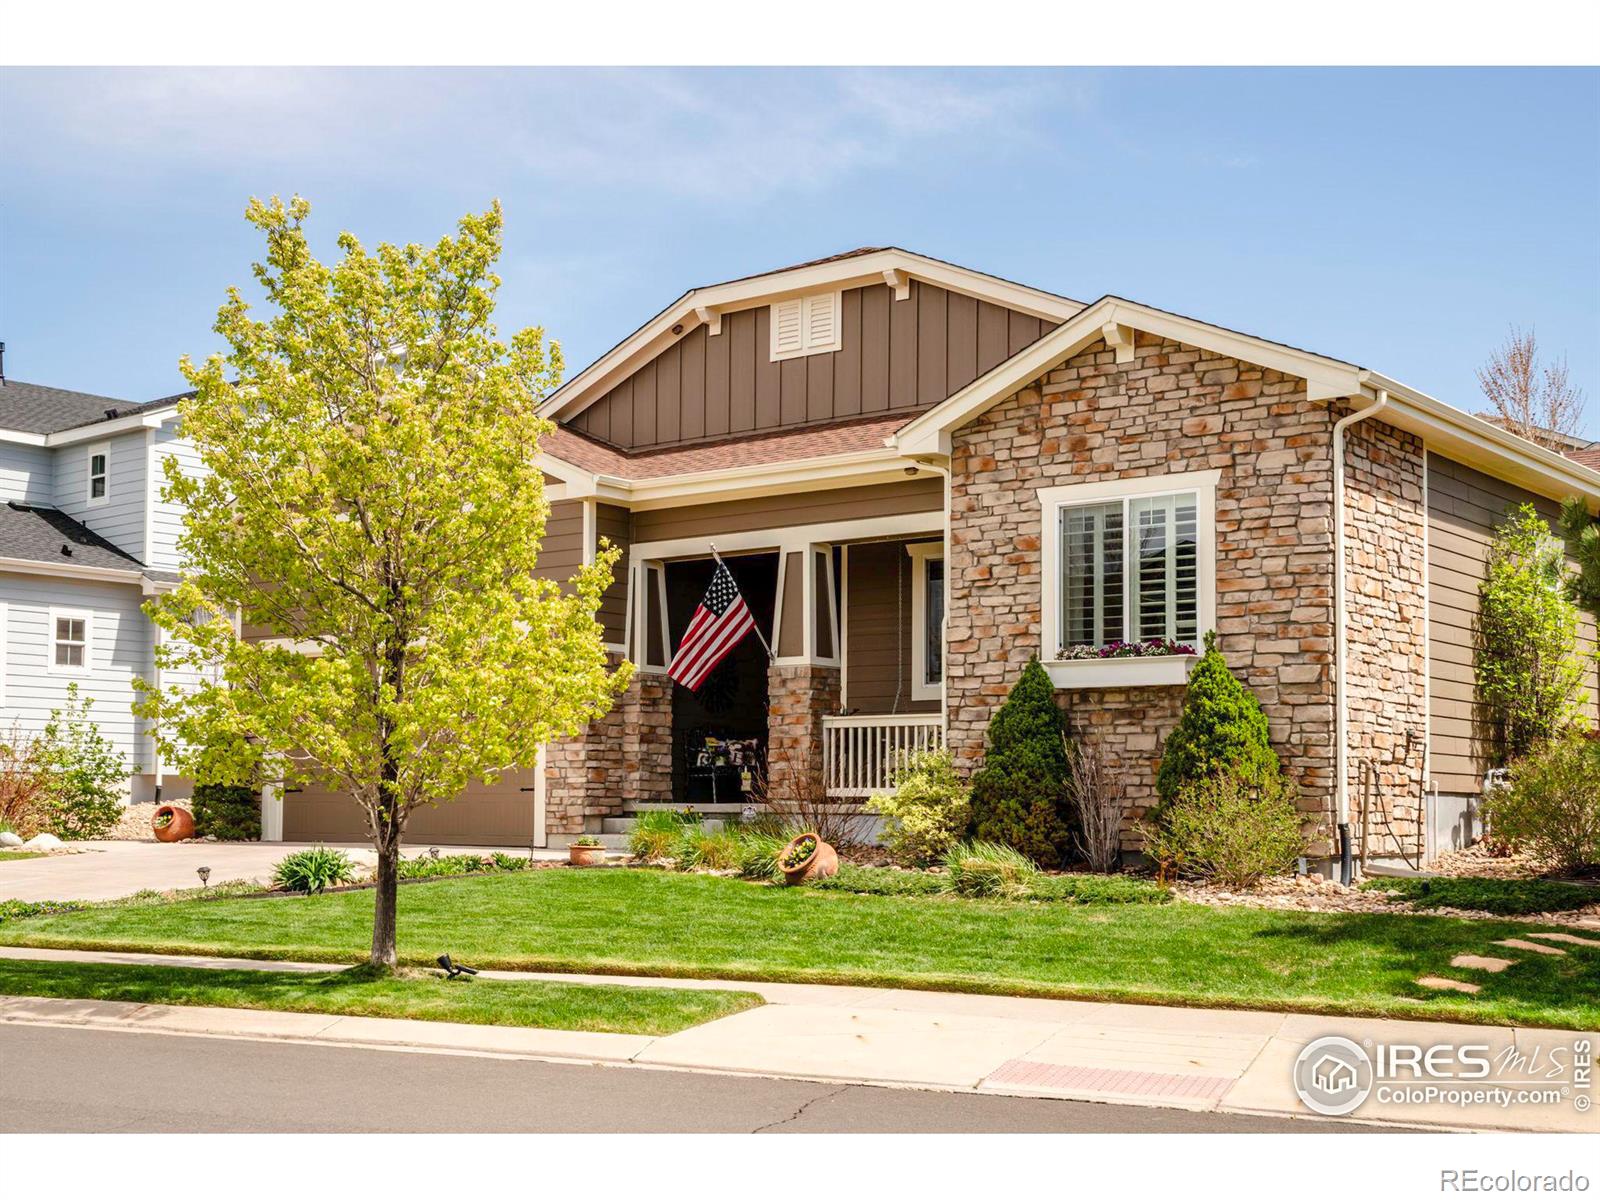 14794  falcon drive, Broomfield sold home. Closed on 2024-05-23 for $1,170,000.